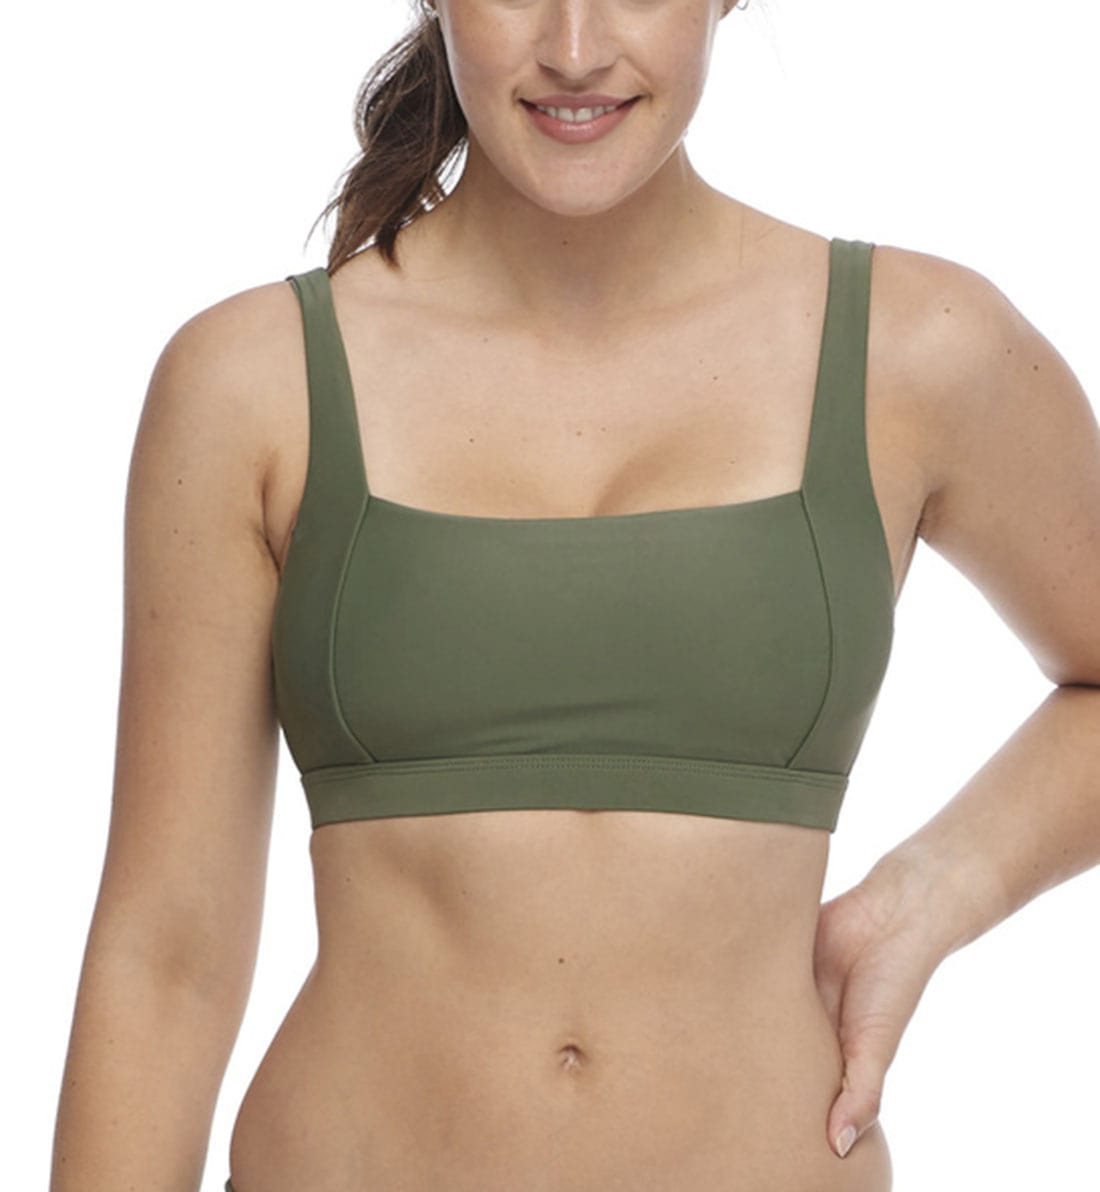 Body Glove Smoothies Alison D/DD Bralette Bikini Top (39506228D),Small,Cactus - Cactus,Small D/DD Cup